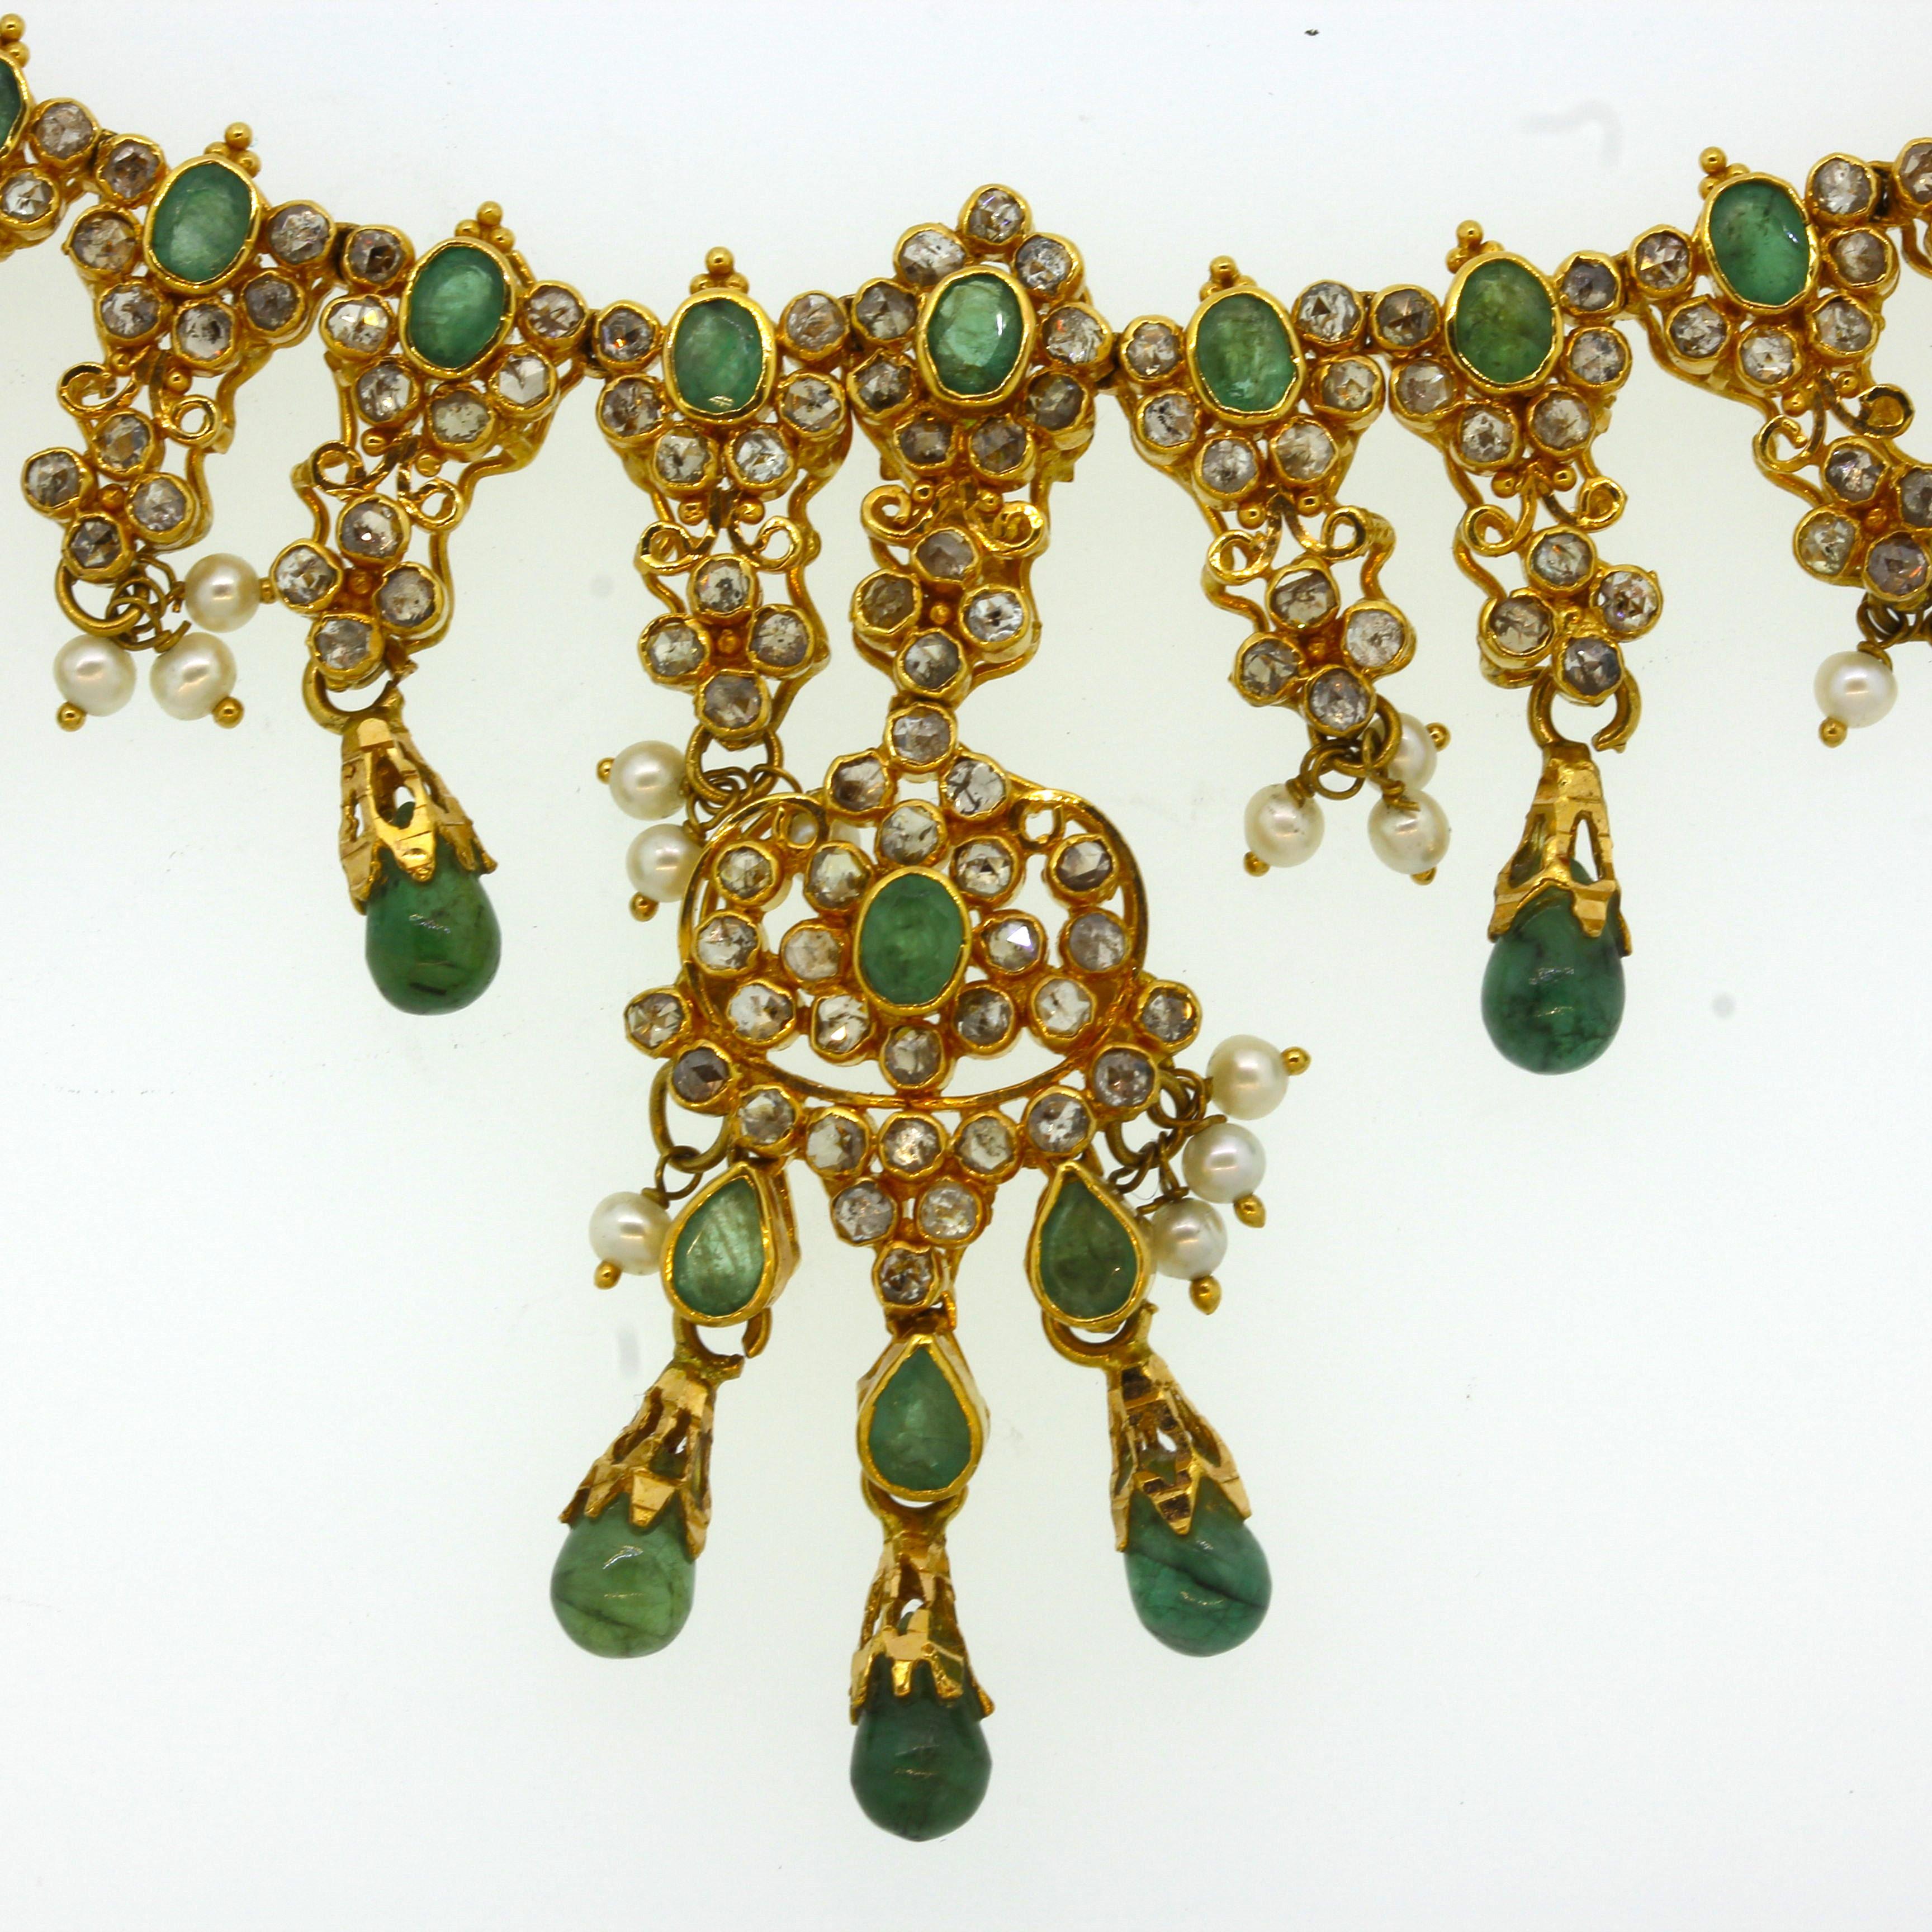 A lovely decorative piece featuring faceted and cabochon emerald drops, natural seed pearls and a plethora of diamonds! They are all set in 22k yellow gold giving the necklace a bright yellow color. 

Length: 15.5 inches

Weight: 38.3 grams